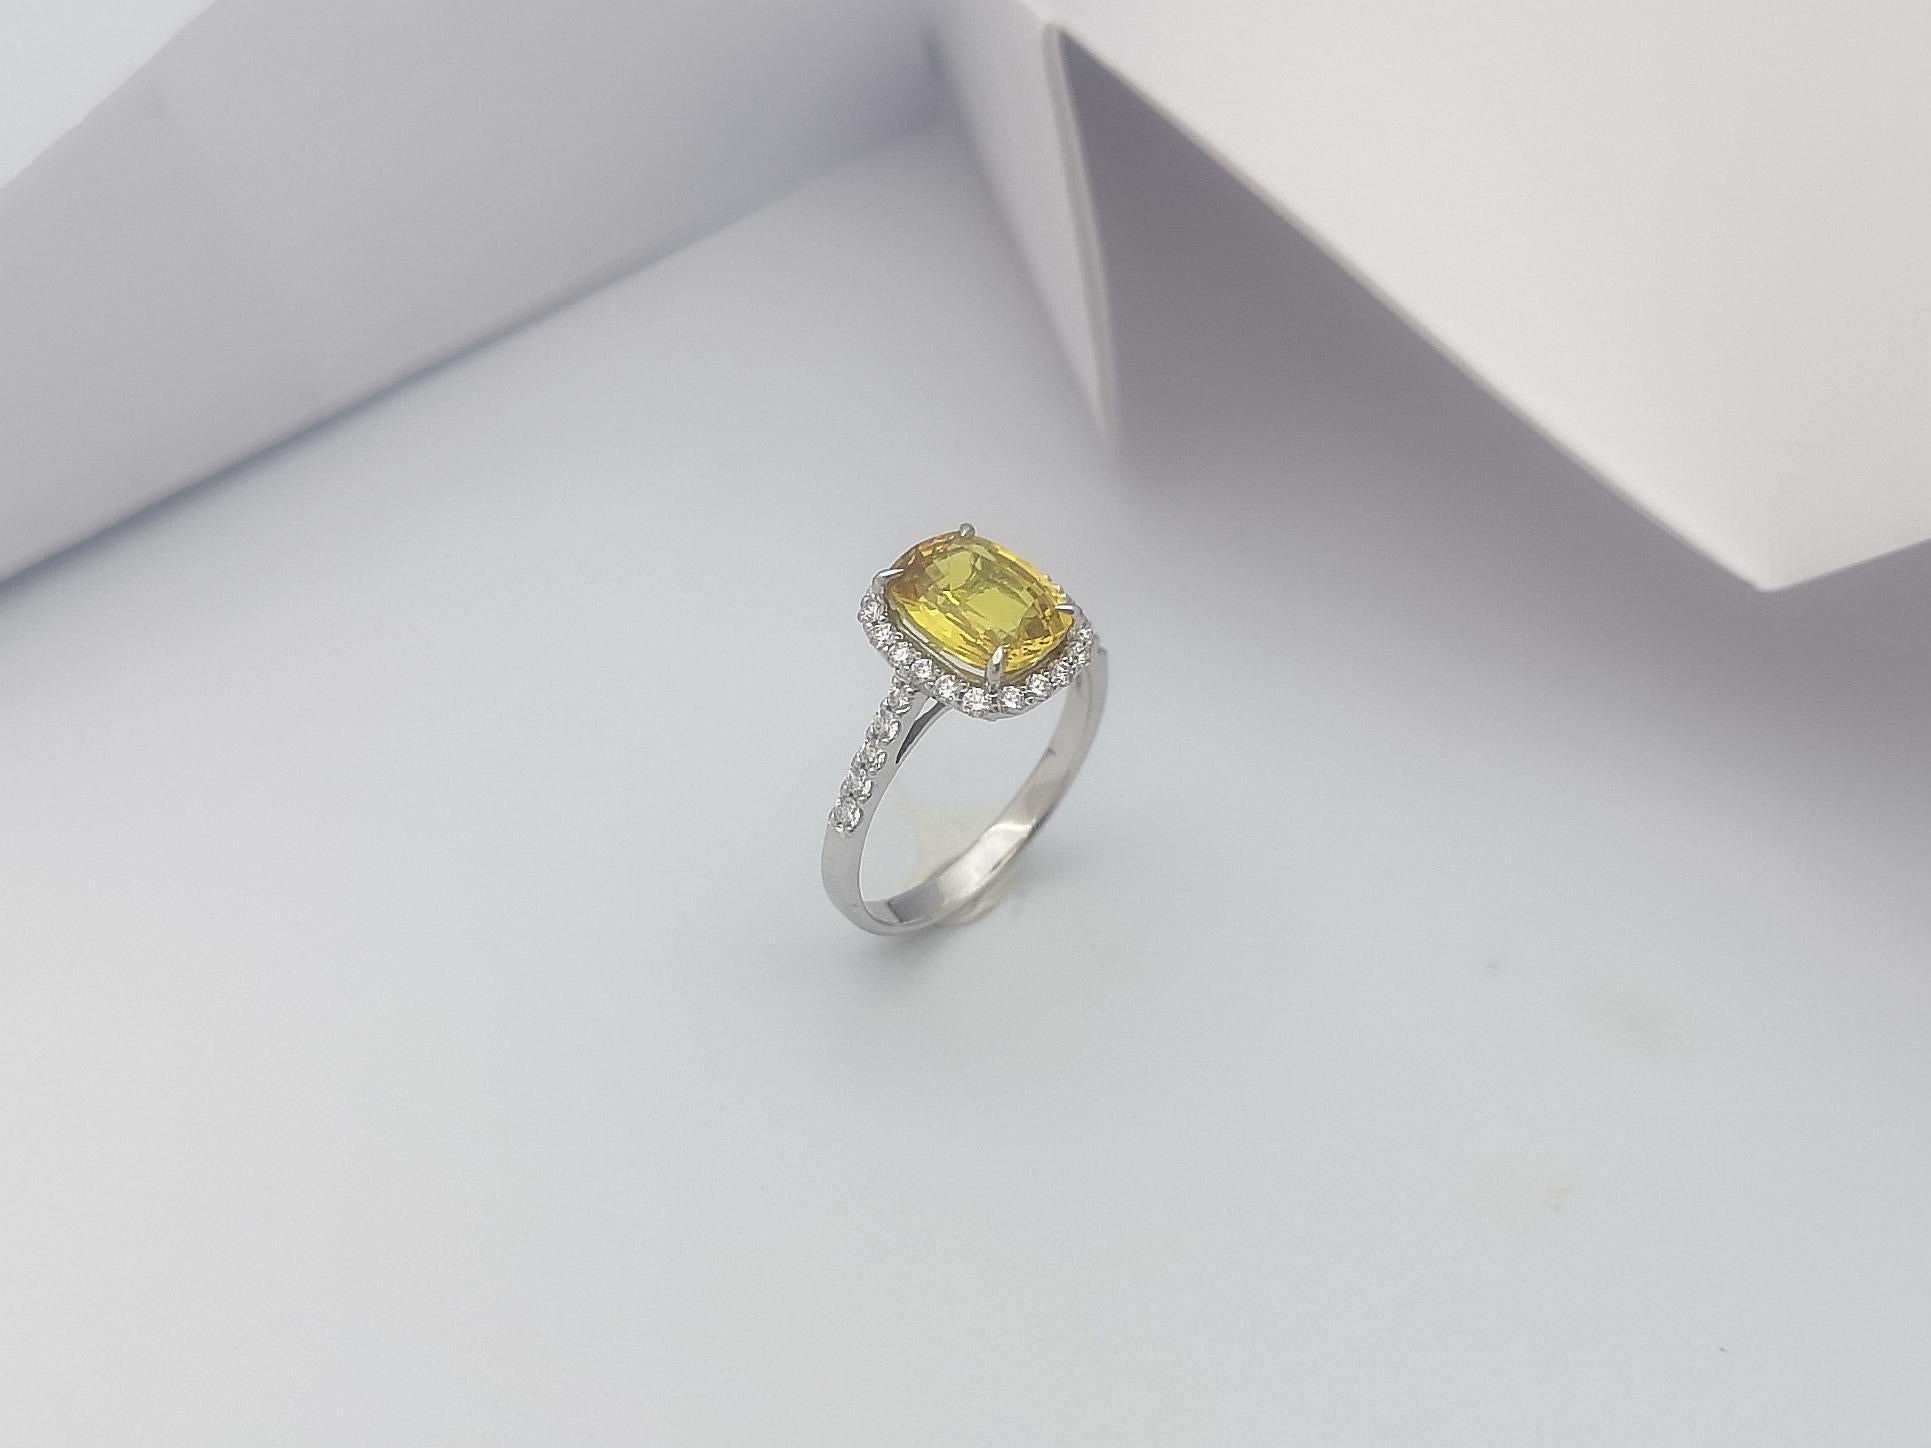 Cushion Cut Yellow Sapphire with Diamond Halo Ring Set in 18 Karat White Gold For Sale 5